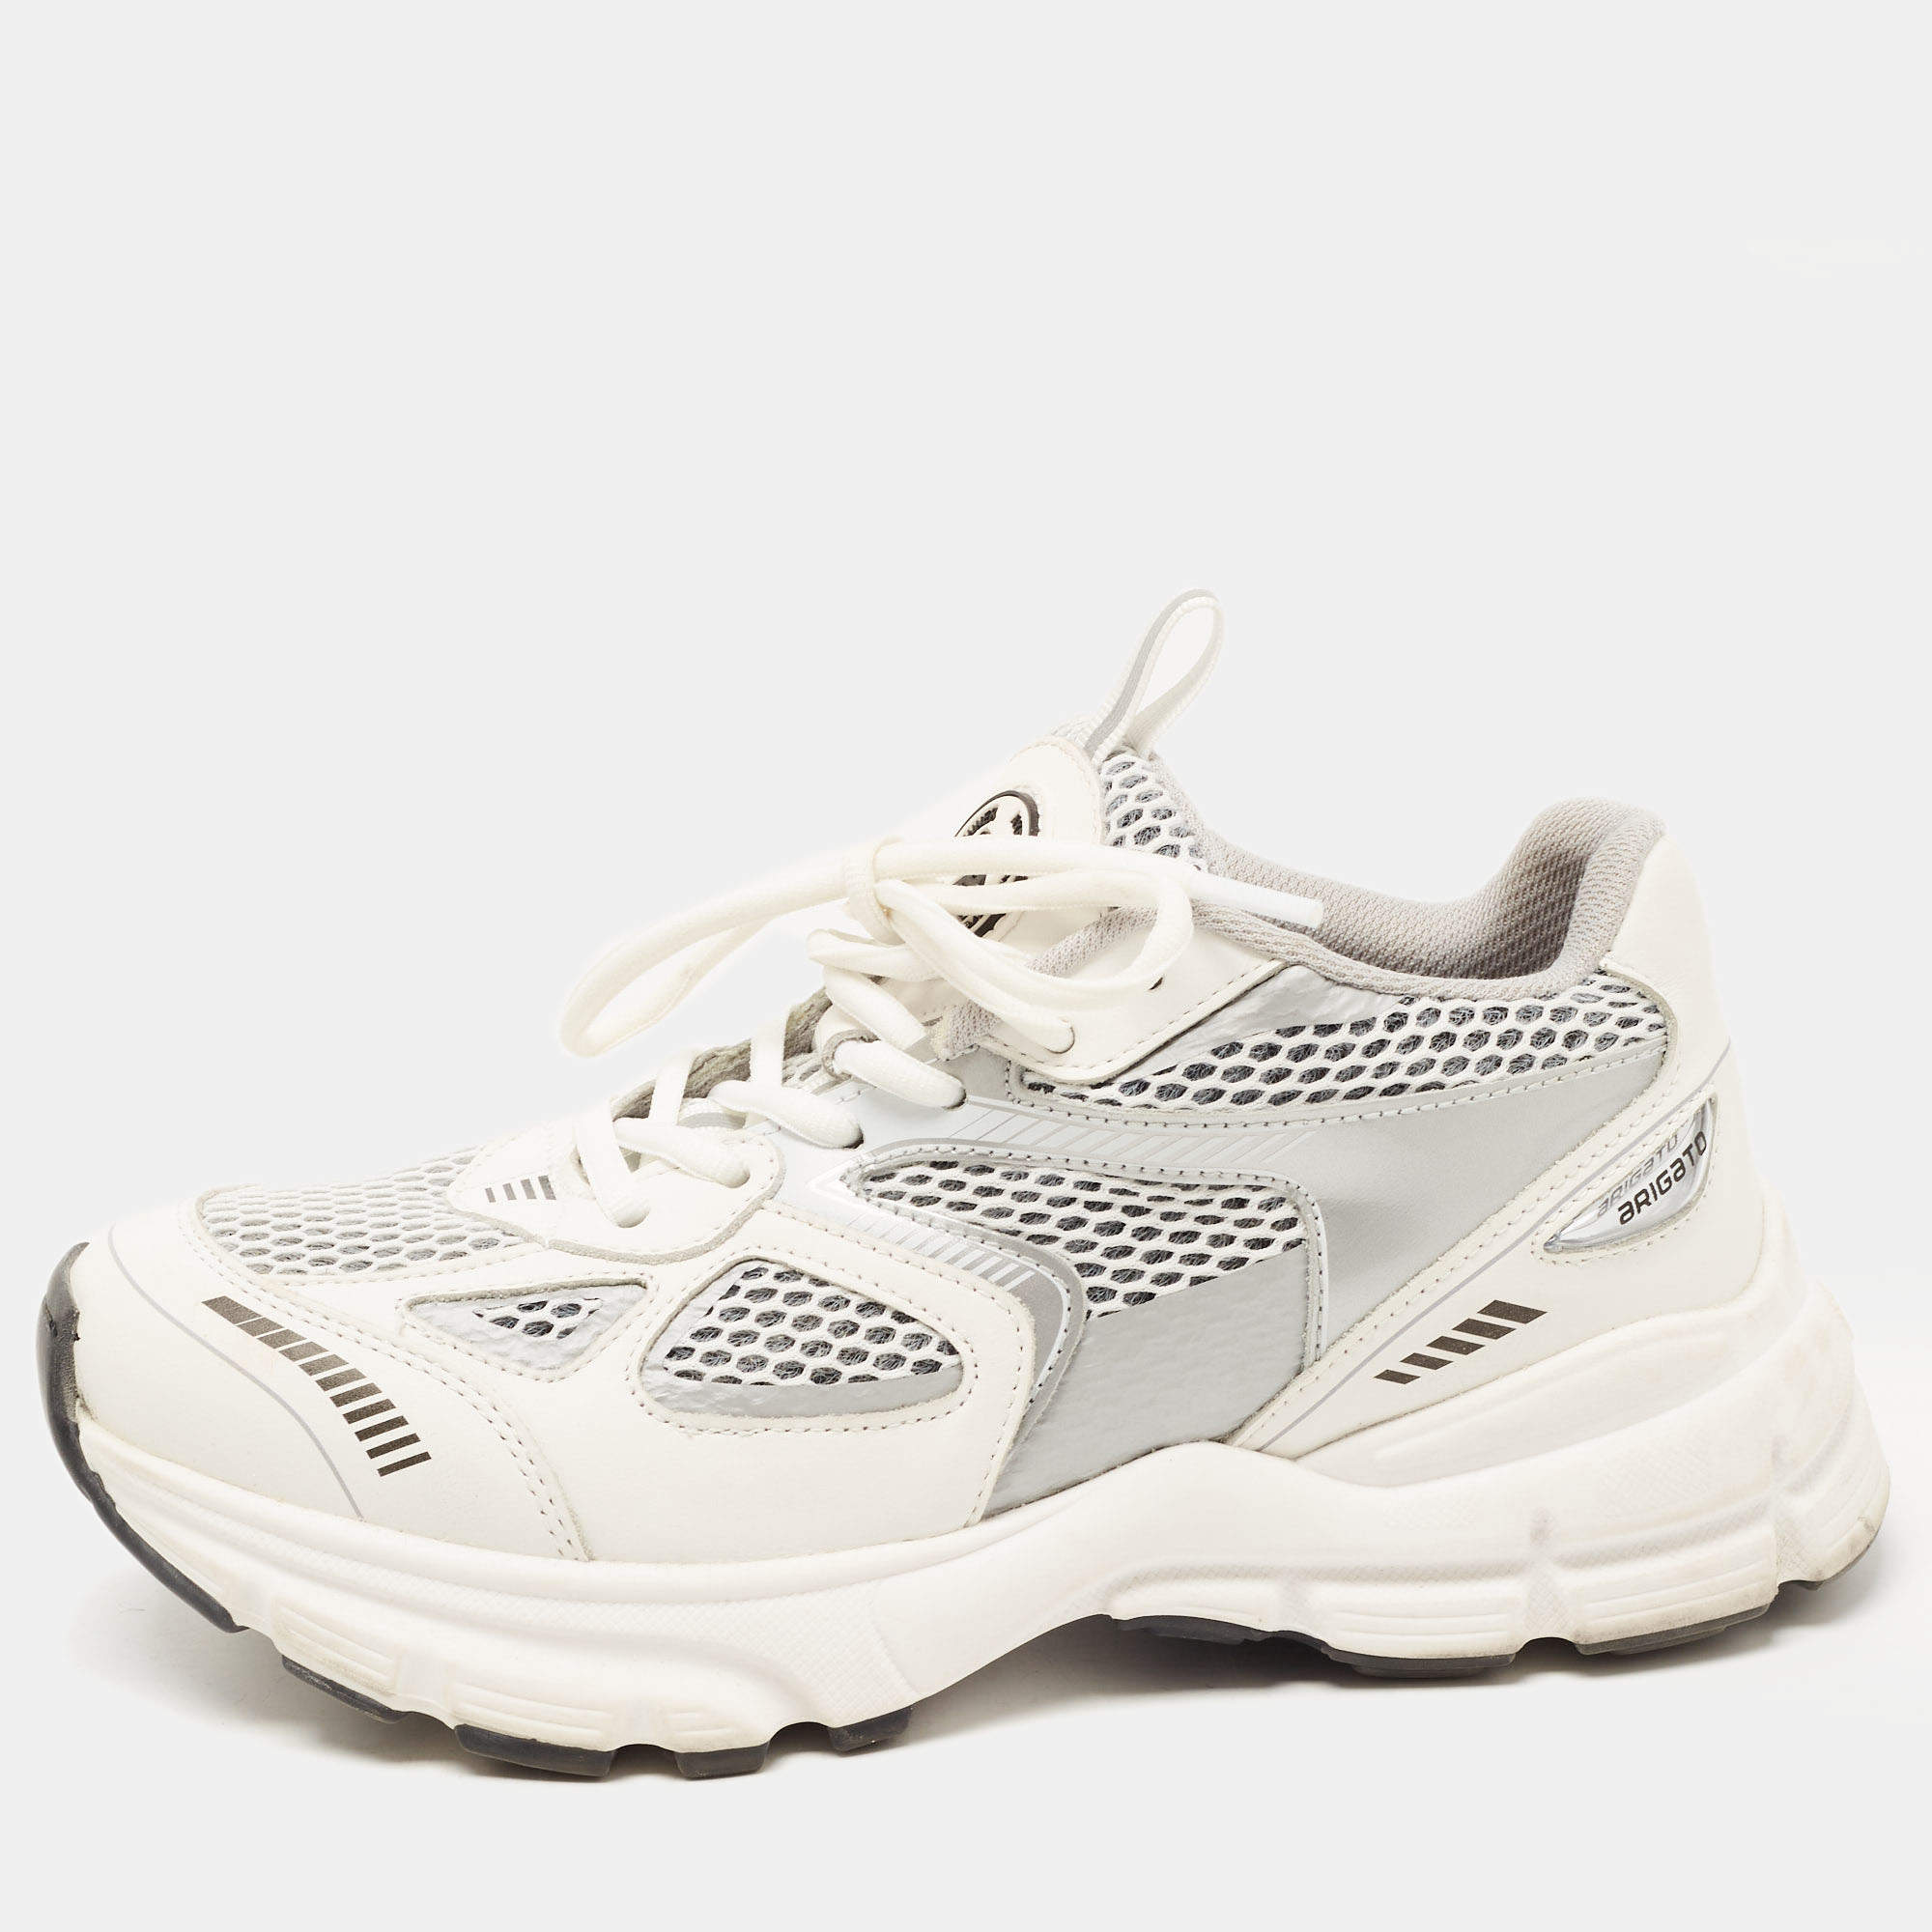 Axel Arigato White/Grey Mesh and Leather Marathon Runner Sneakers Size ...